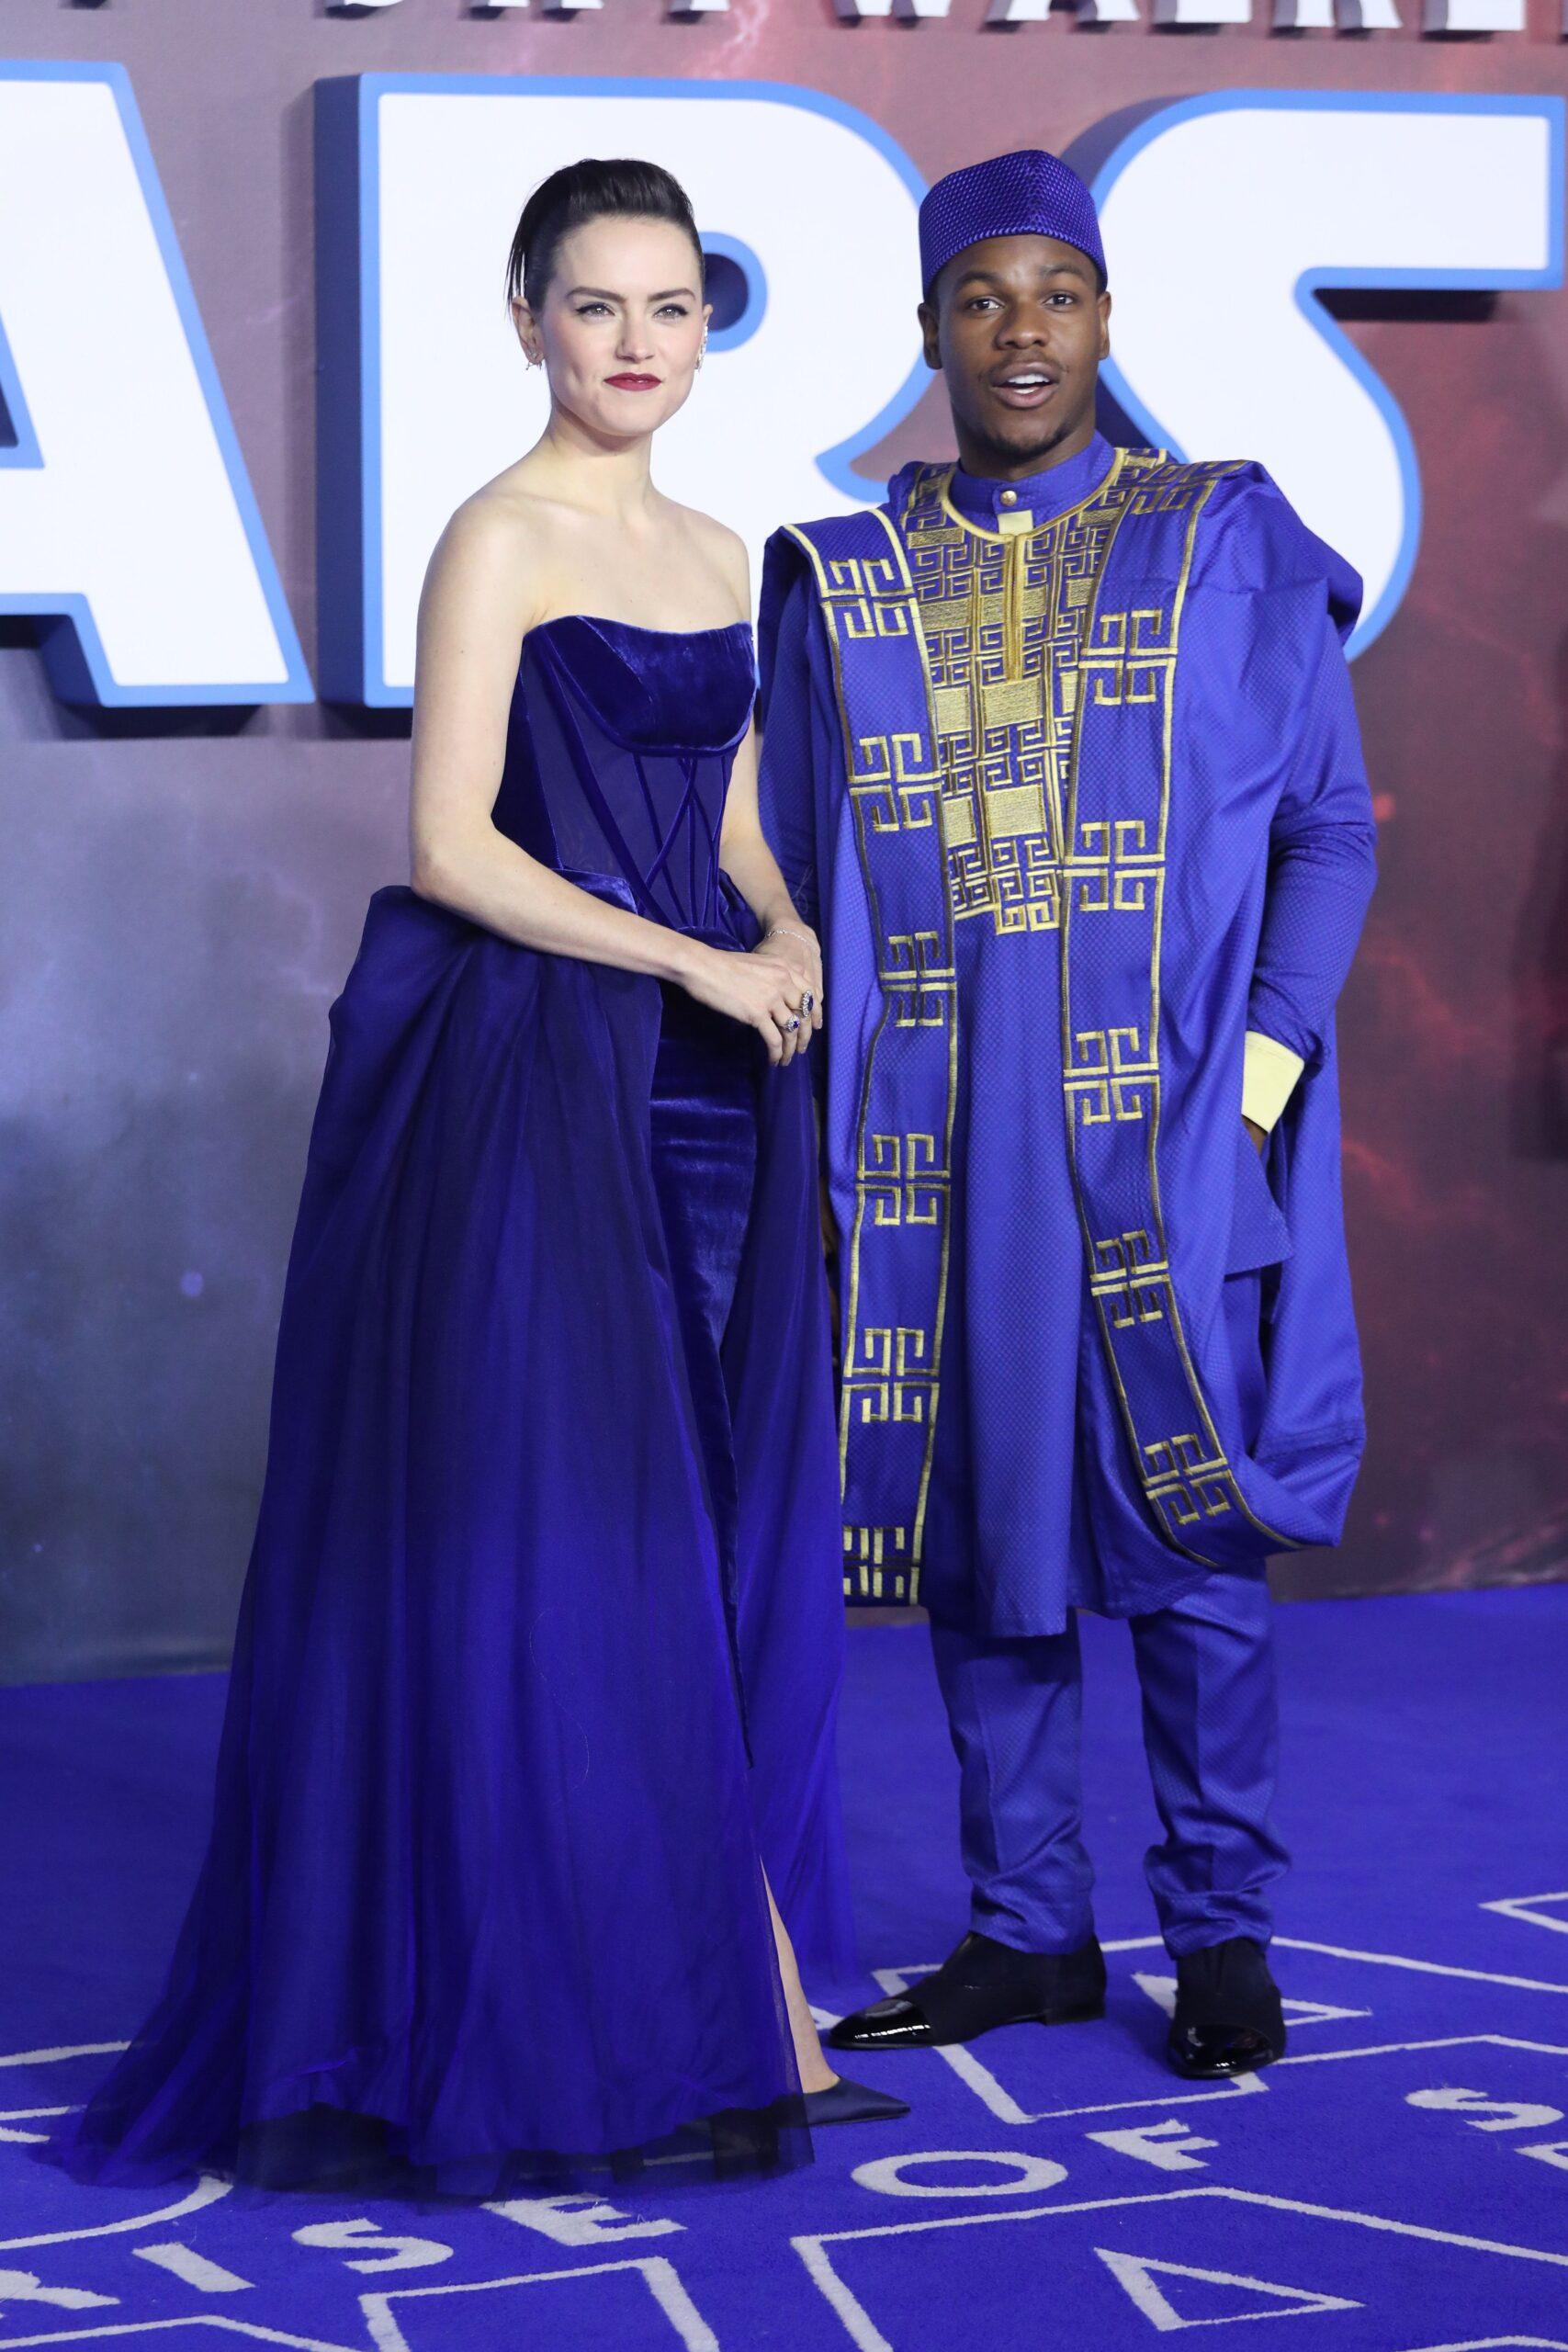 Daisy Ridley and John Boyega pose together at Star Wars premiere